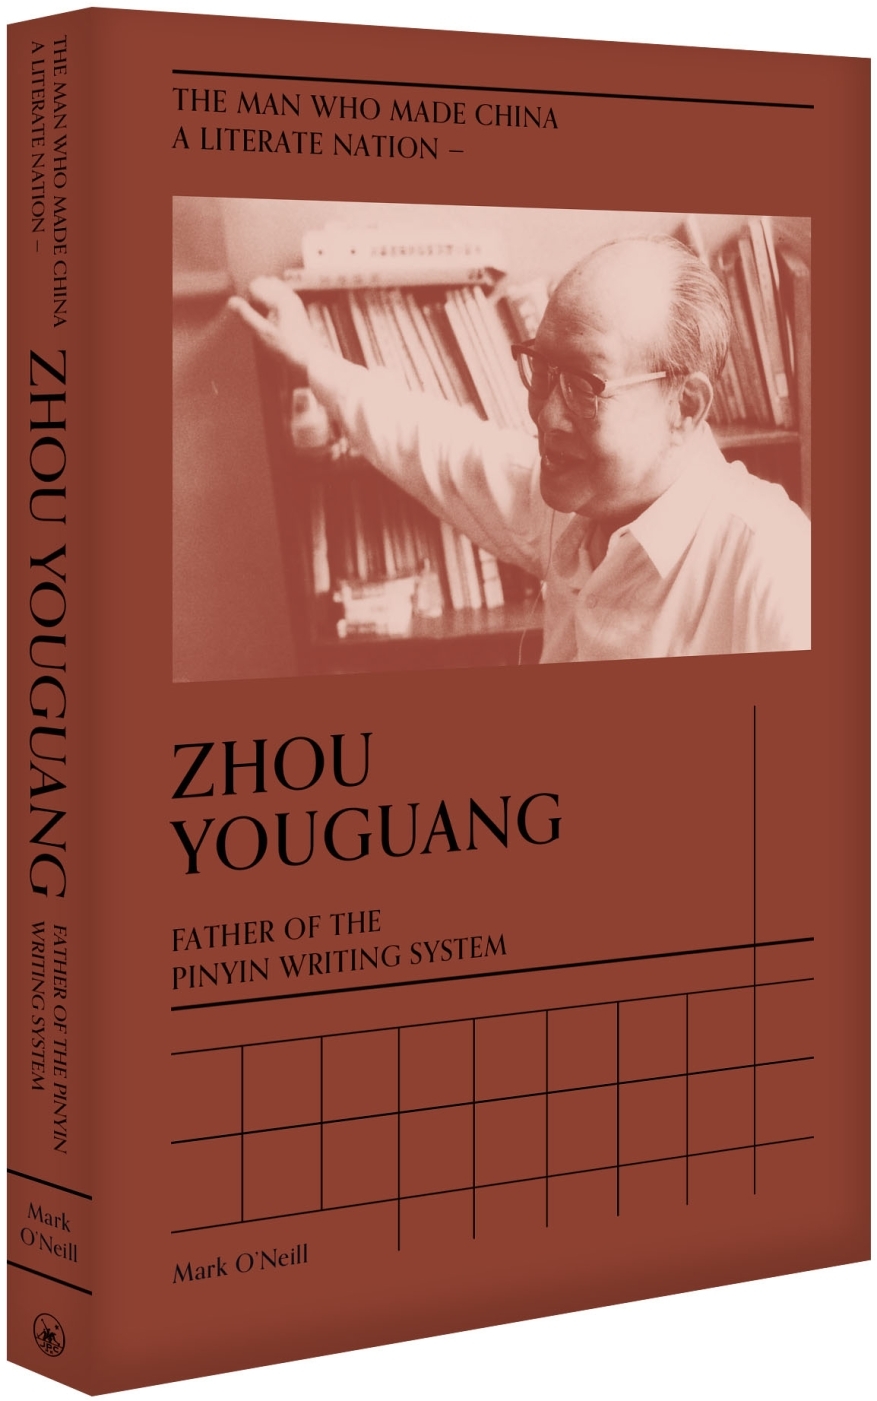 The Man Who Made China a Literate Nation – Zhou Youguang, Father of the Pinyin Writing System